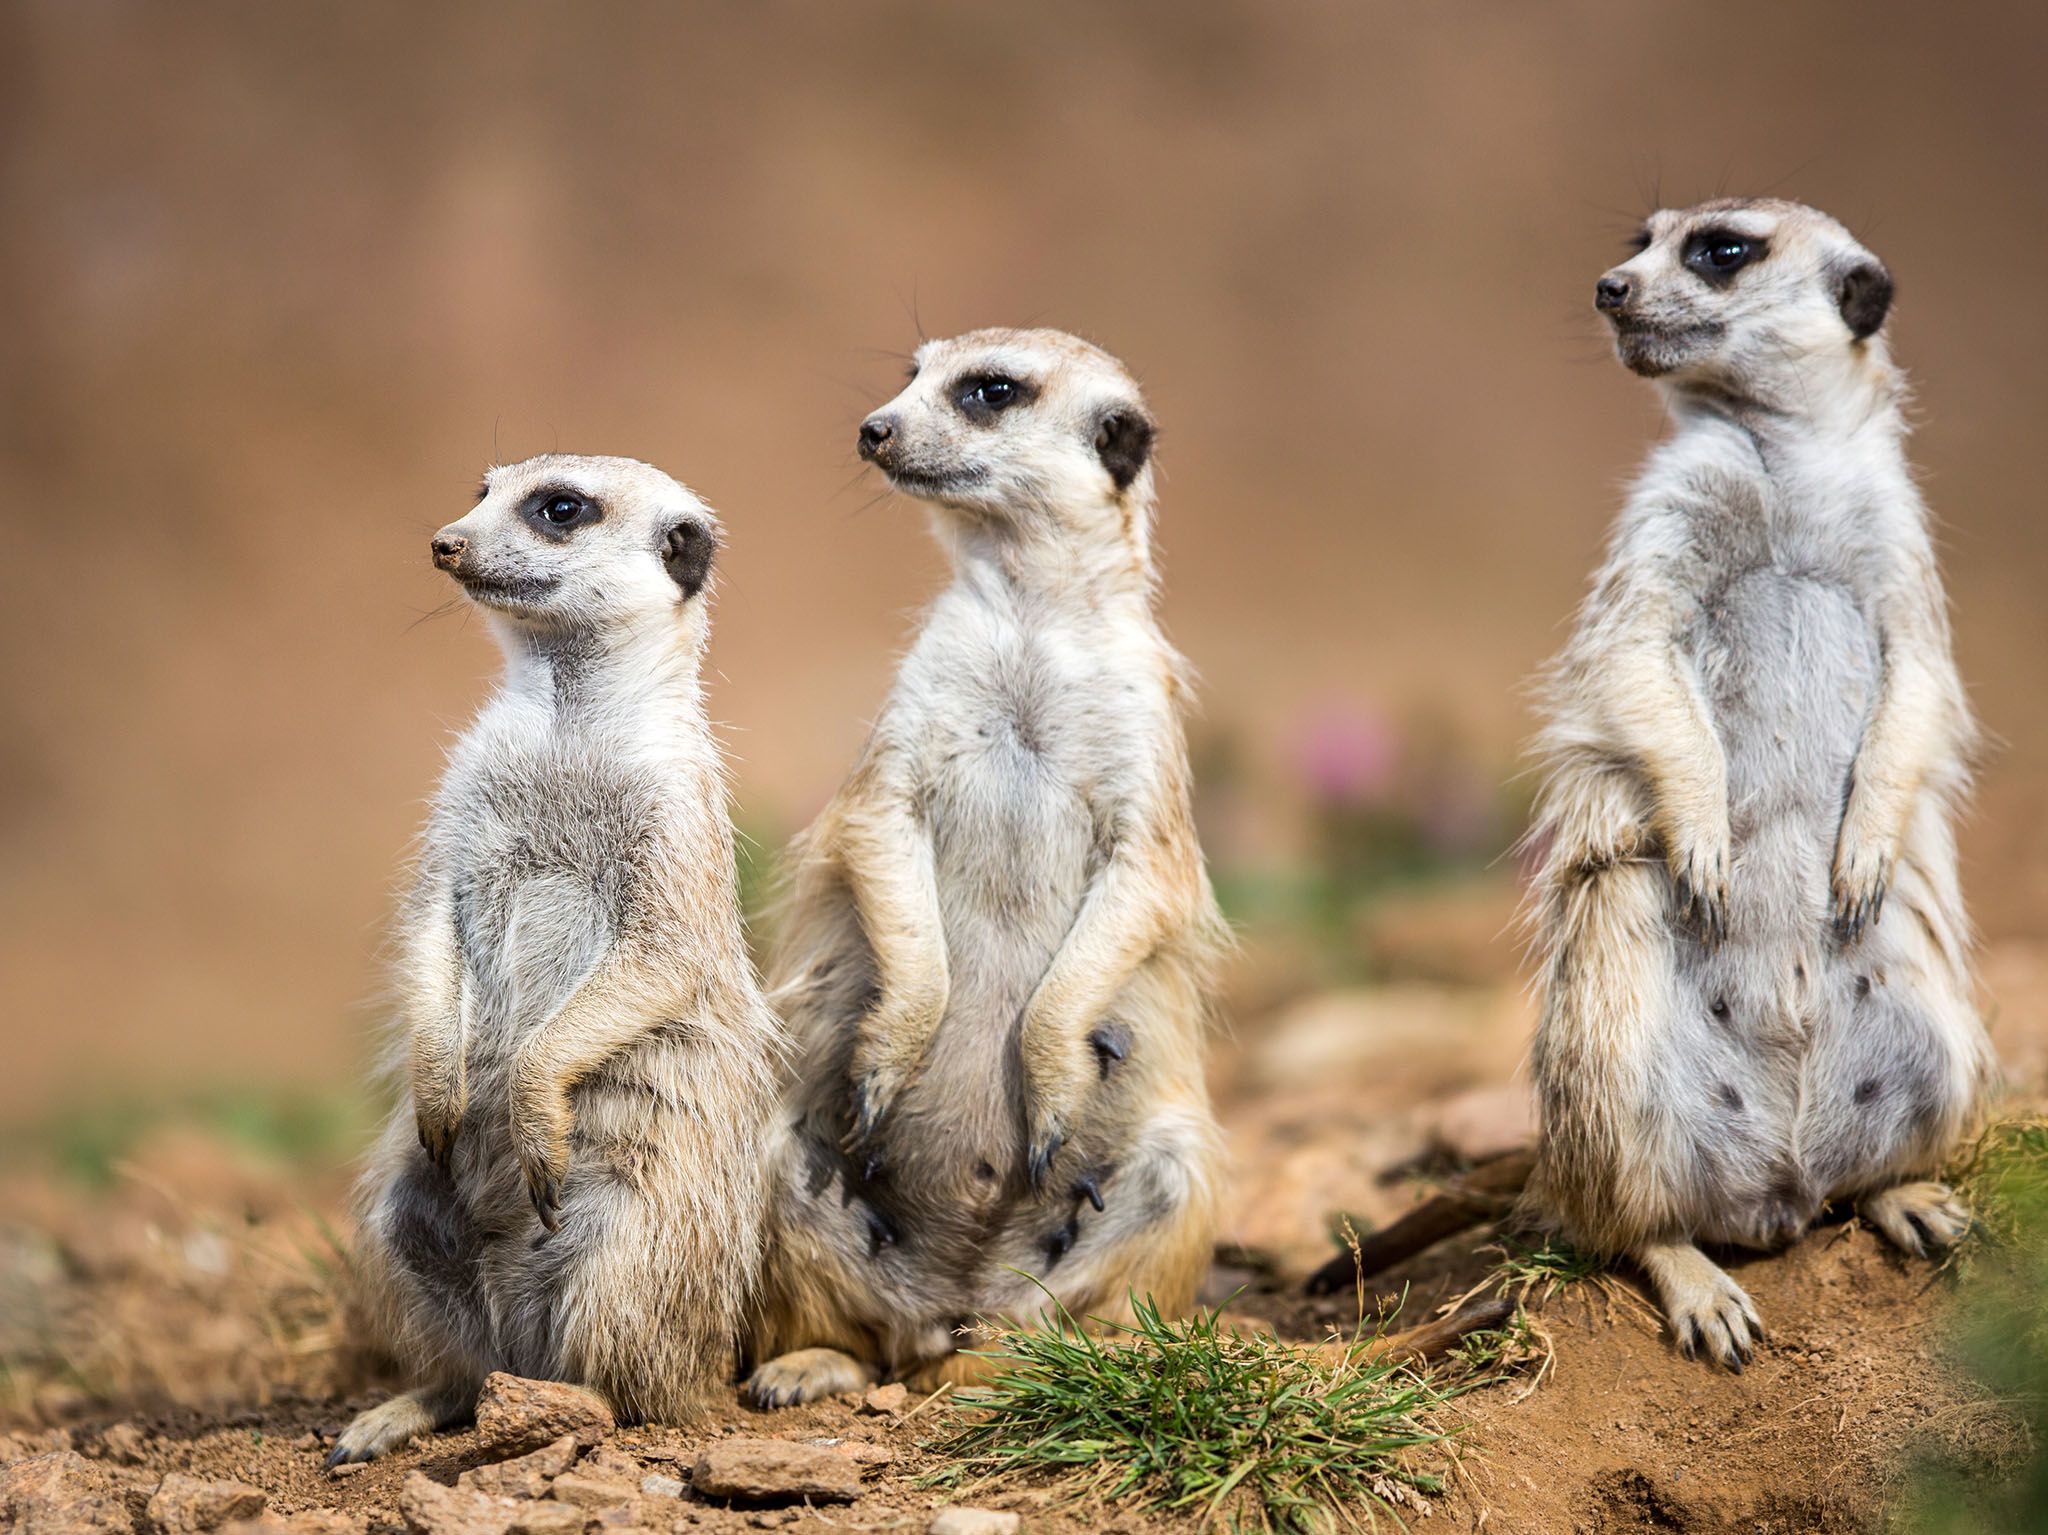 South Africa: Watchful meerkats standing guard. This image is from Survive The Wild. [Photo of the day - June 2017]